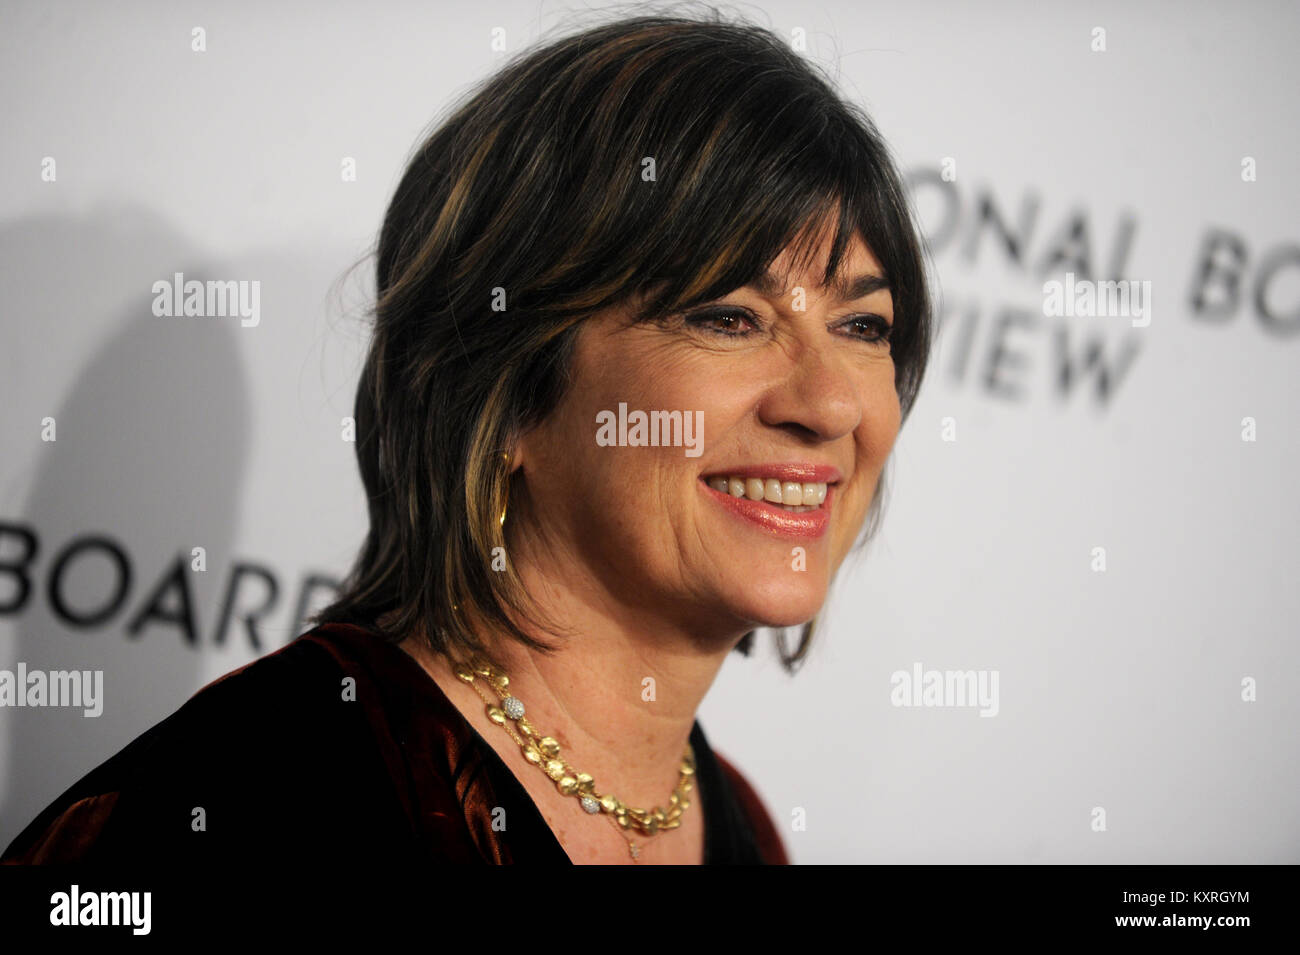 NEW YORK, NY - JANUARY 09: Christiane Amanpour  attends the The National Board Of Review Annual Awards Gala at Cipriani 42nd Street on January 9, 2018 in New York City.   People:  Christiane Amanpour Stock Photo